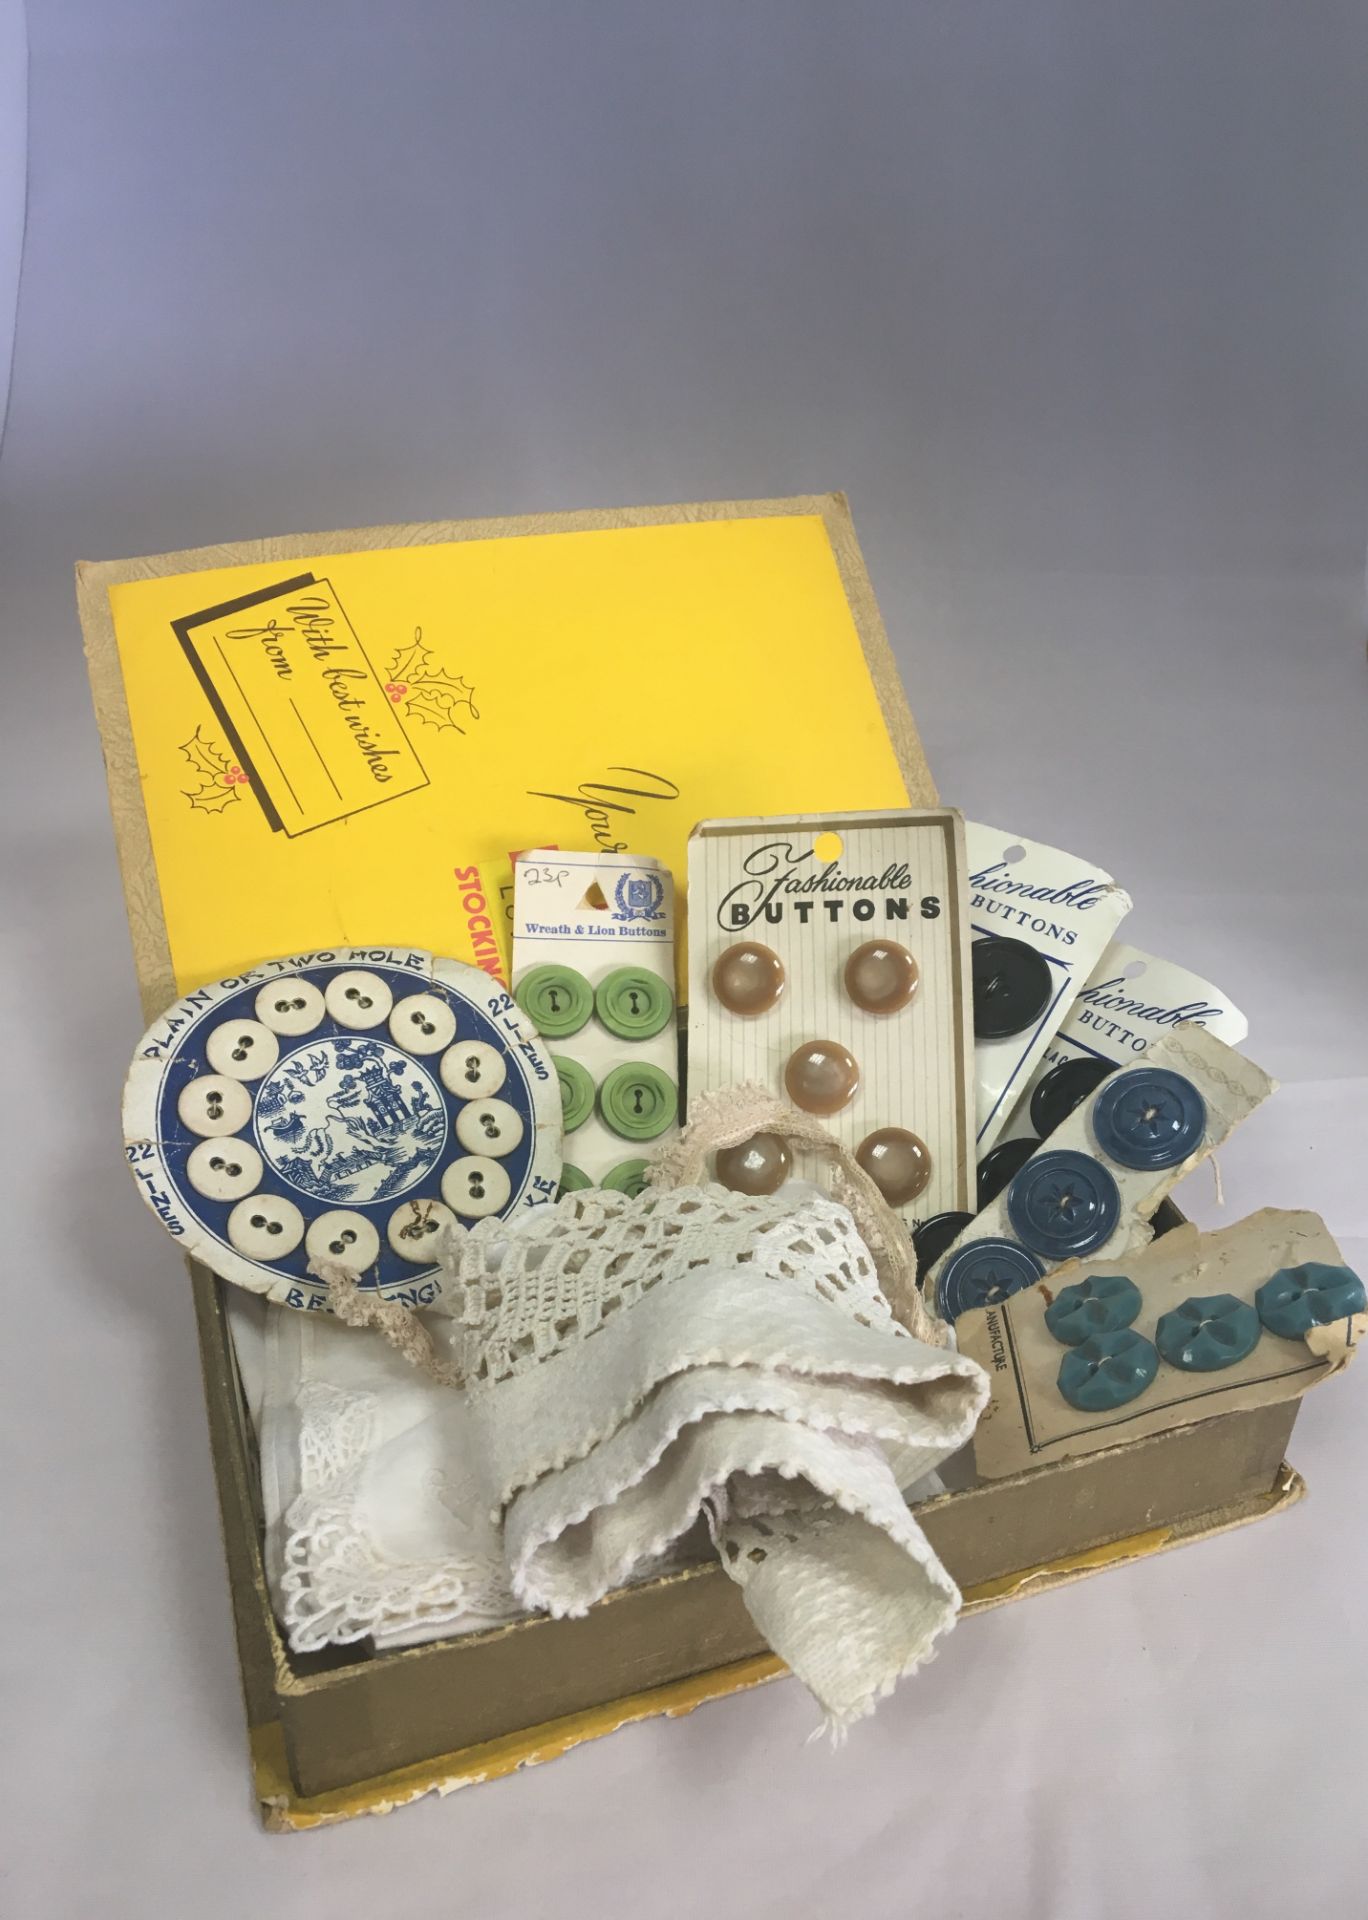 VINTAGE BOX AS SHOWN WITH CONTENTS TO INCLUDE LACE, EMBROIDERED HANDKERCHIEFS, VINTAGE BUTTONS ON